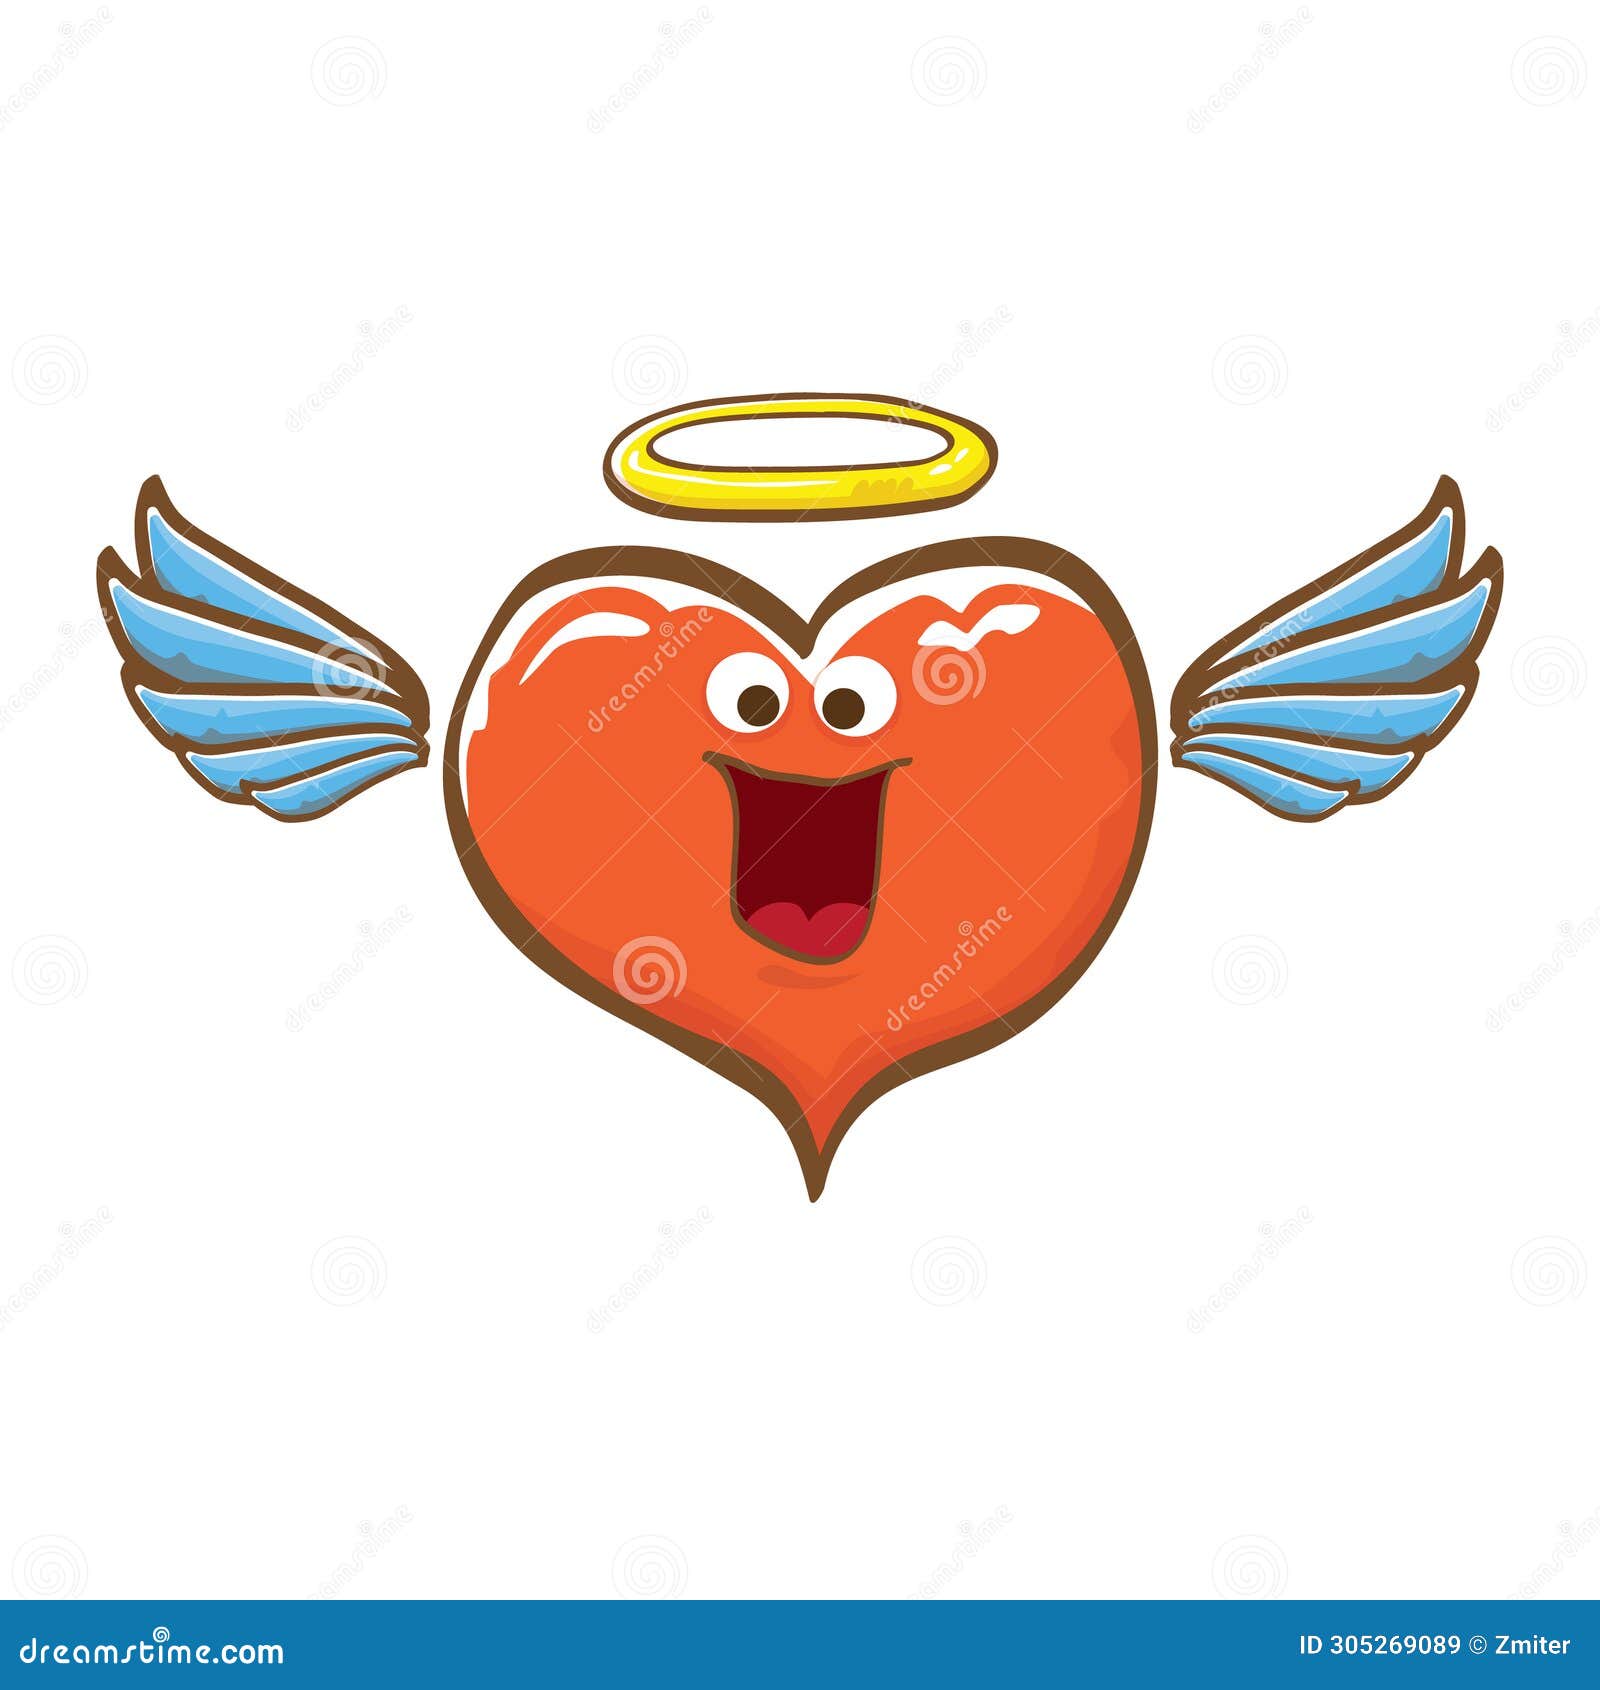 cartoon bintage groovy heart character with wings and holy angel golden nimbus  on white background. conceptual